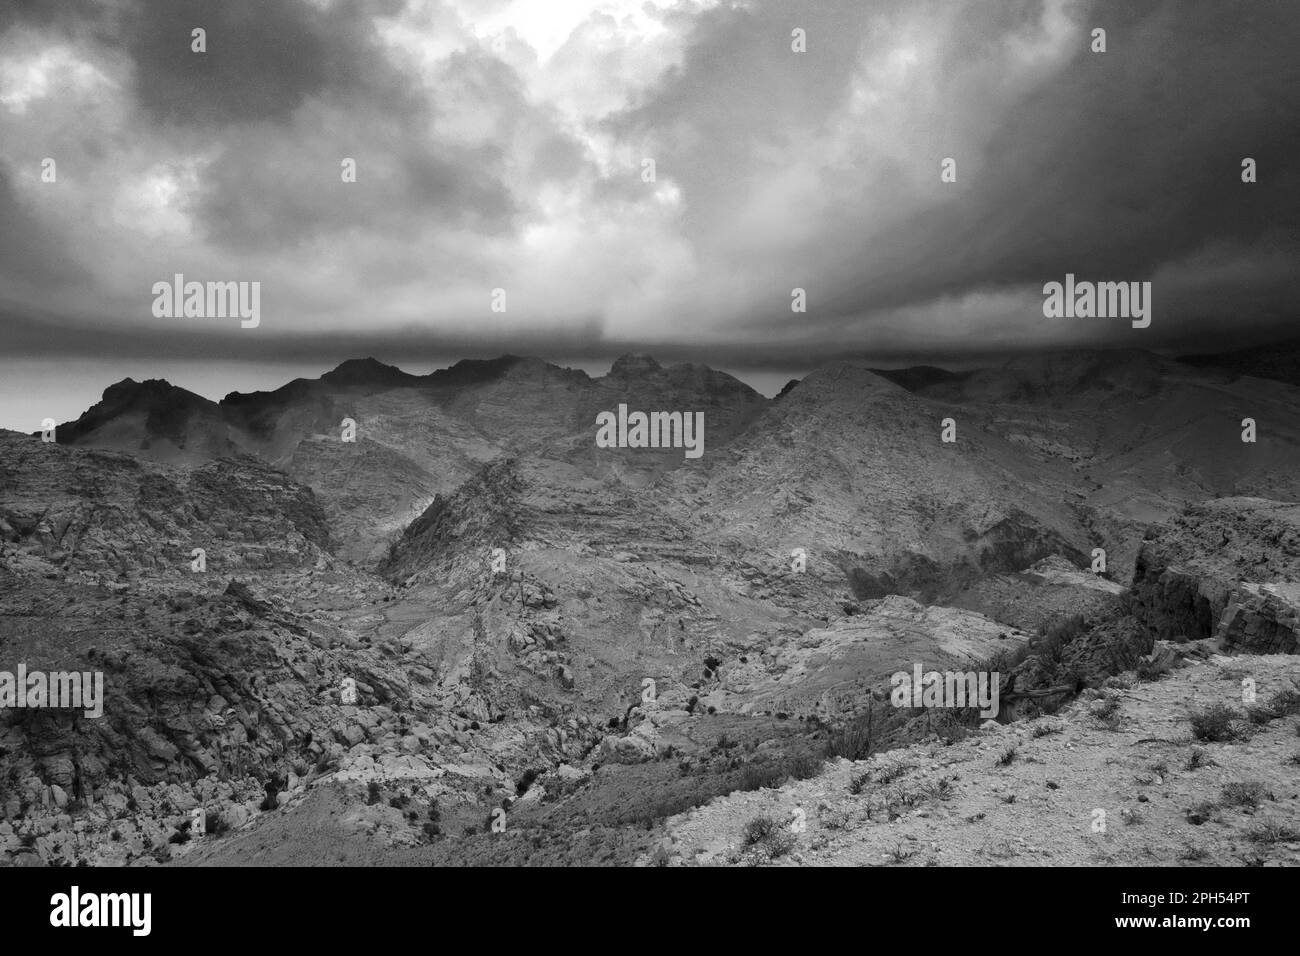 View over the landscape of Jabal Abu Mahmoud Mountains, South Central Jordan, Middle East Stock Photo